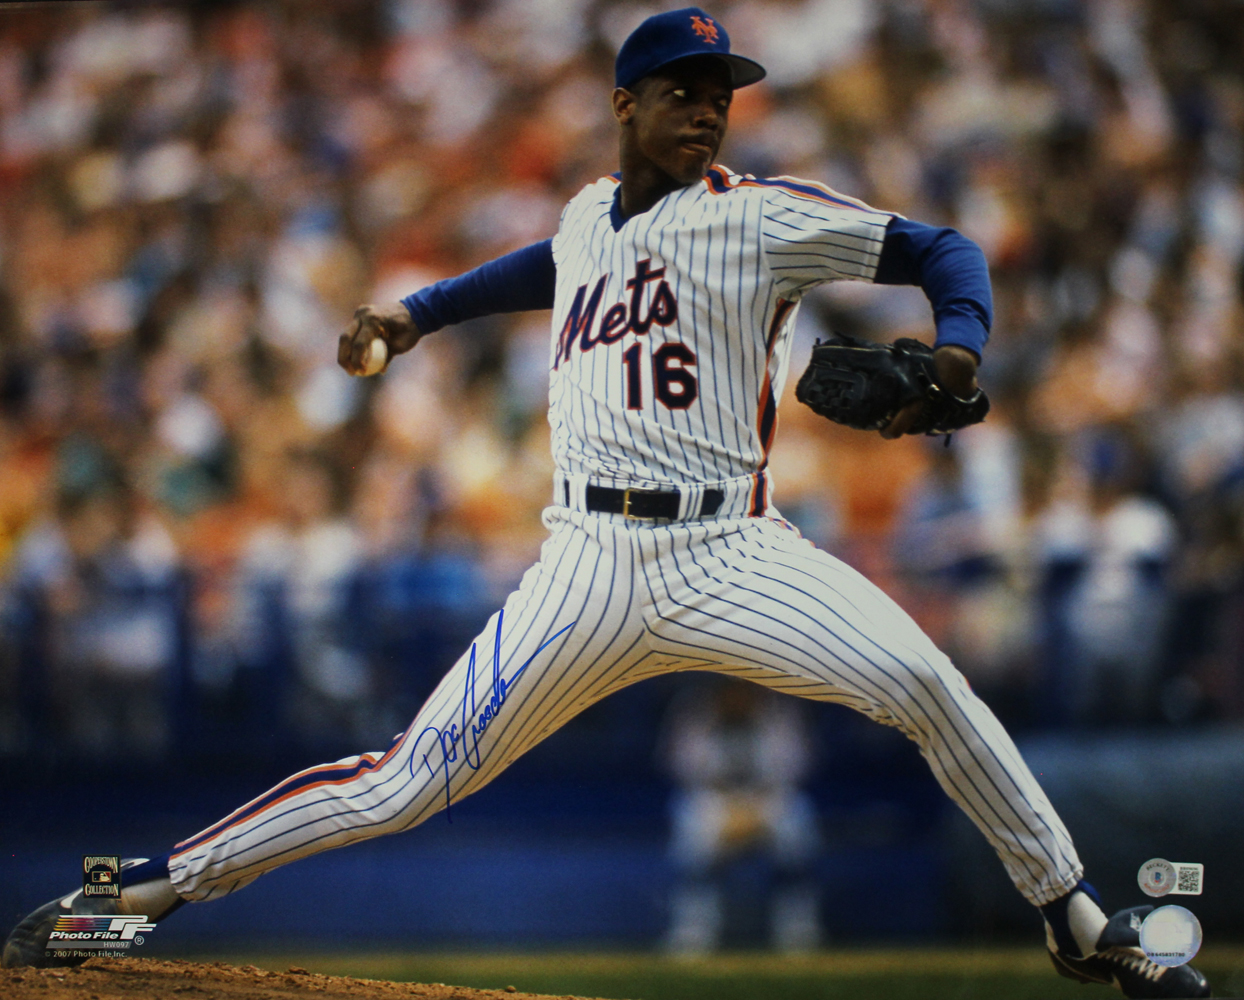 Dwight Gooden Autographed/Signed New York Mets 16x20 Photo Beckett